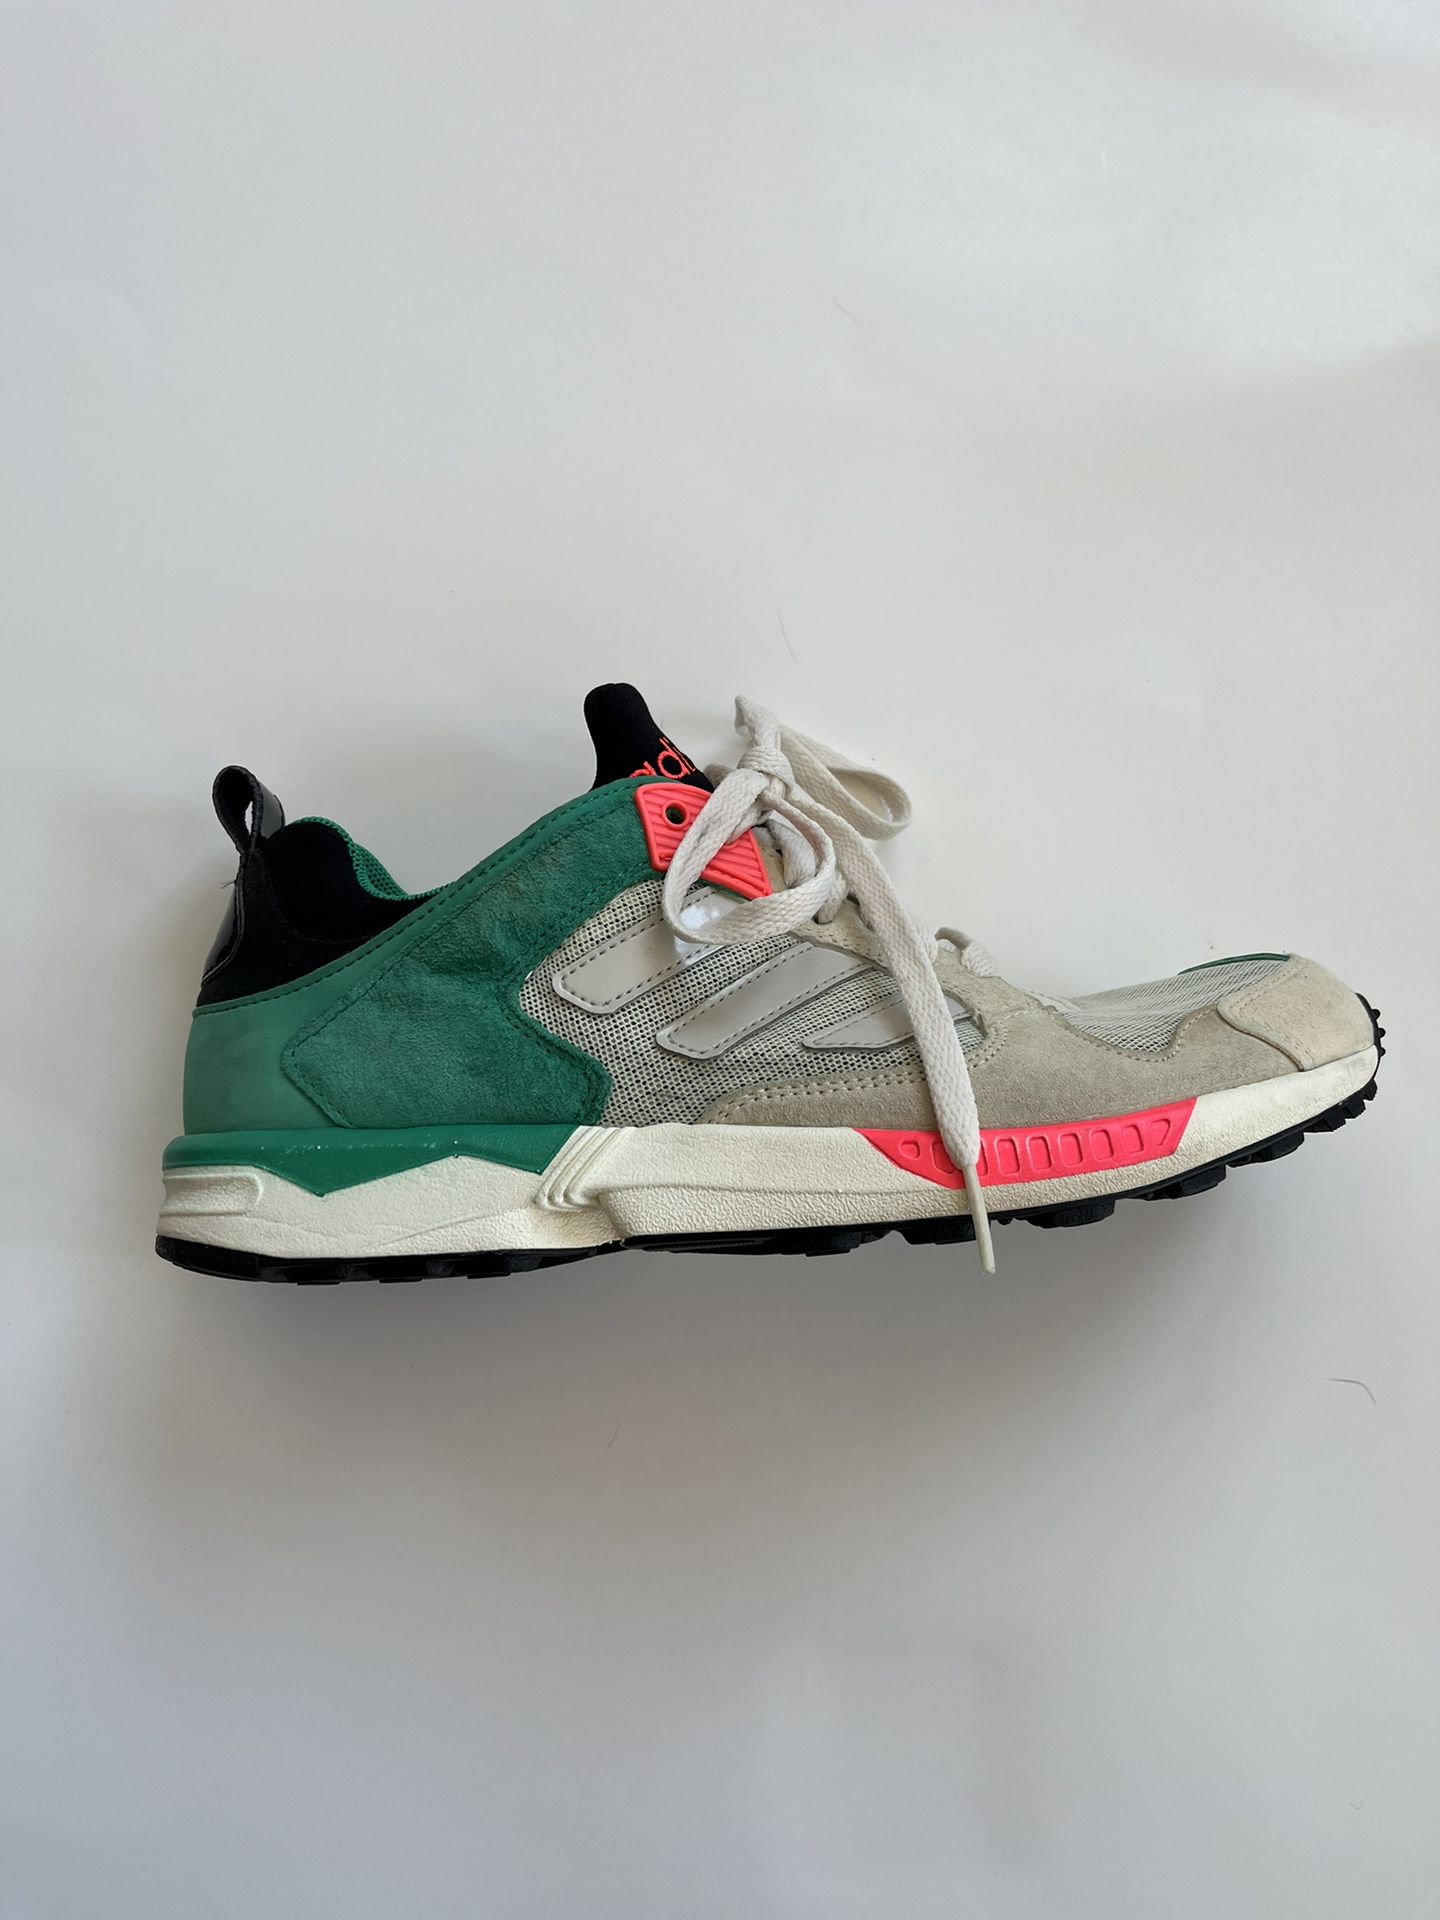 ADIDAS ZX 5000 RSPN Size 8.5 for Sale in San Diego, CA - OfferUp